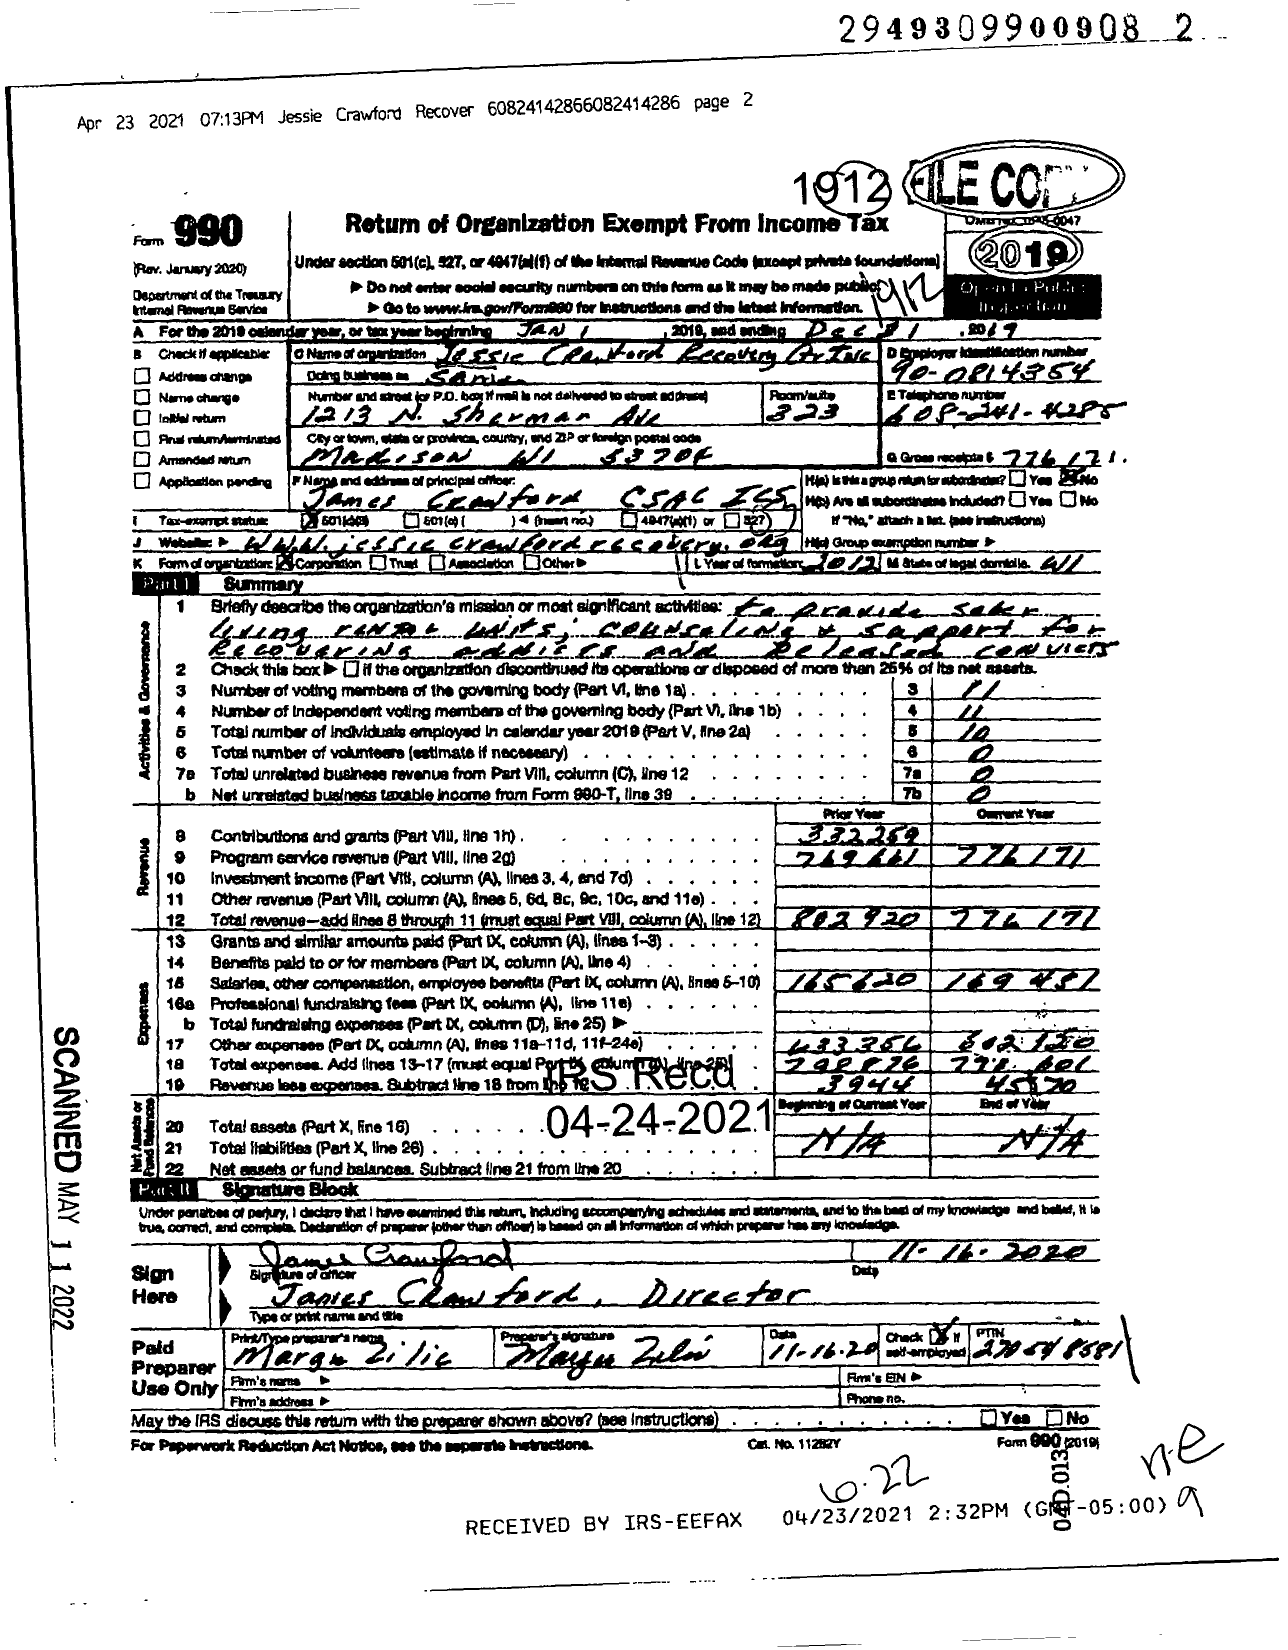 Image of first page of 2019 Form 990 for Jessie Crawford Recovery Center